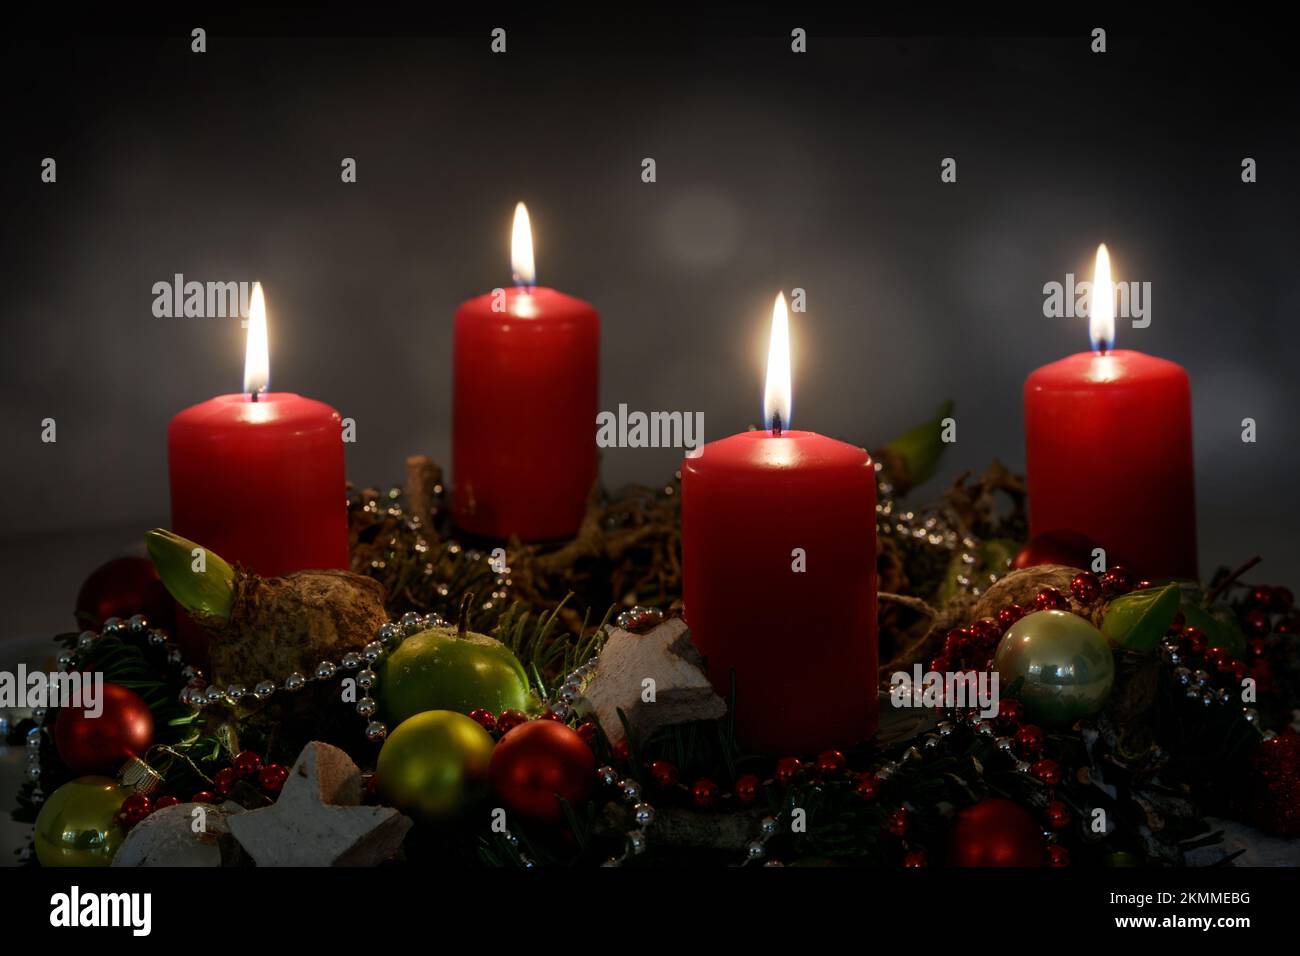 Candle light in the night, part of an Advent wreath with four red candles and Christmas decoration against a dark background, copy space, selected foc Stock Photo